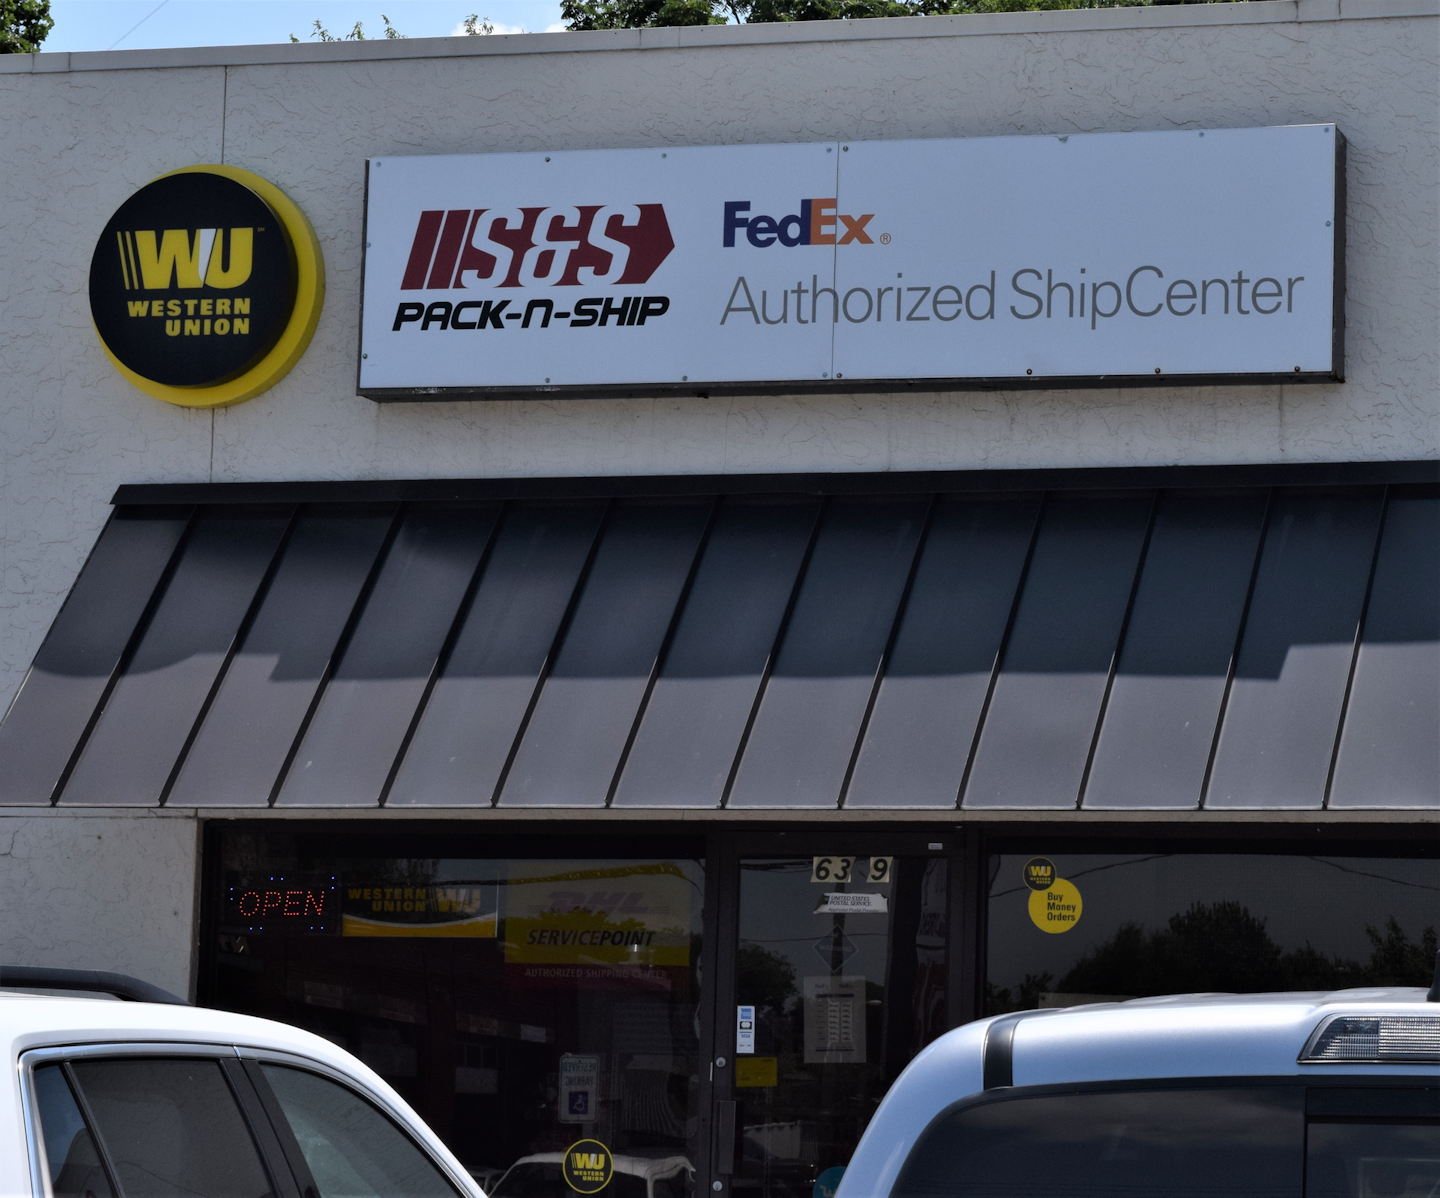 Also as yet absent from the list July 2 was the Delta Truck Tax business, which the 2020 IRS provider list showed as headquartered at the address shown in the picture in Nashville on Charlotte Pike, Suite 992. Queried about the company, the clerk manning the desk inside the FedEx drop location, a relatively small storefront in a strip mall, noted it was common for all manner of businesses to use the address for mail delivery/forwarding.